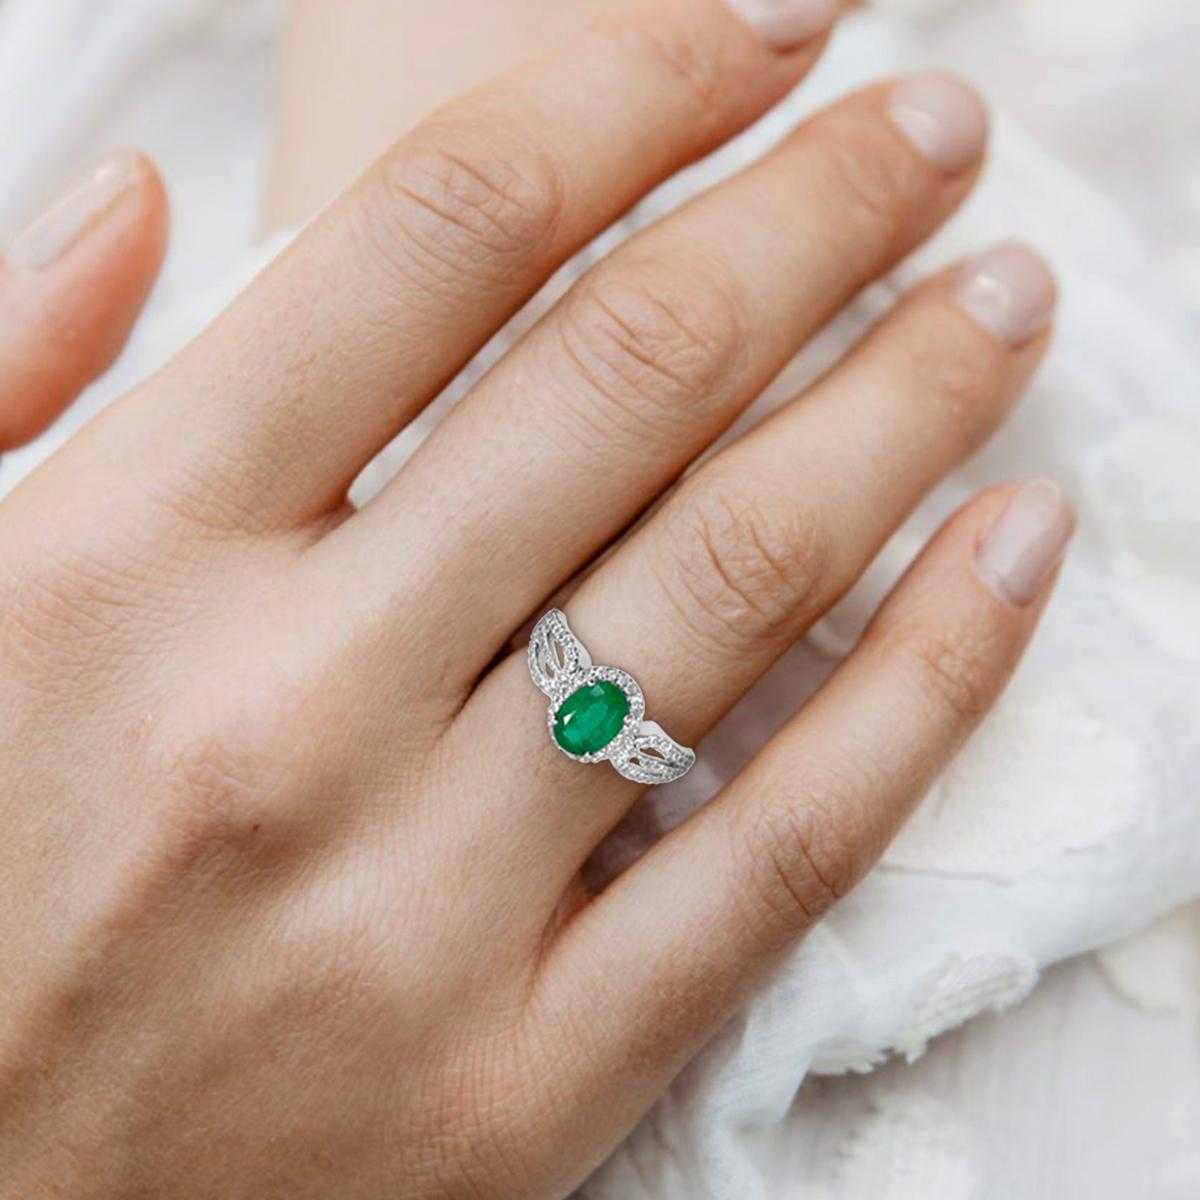 Oval Cut 18K White Gold 1.12cts Emerald and Diamond Ring, Style# TS1023R